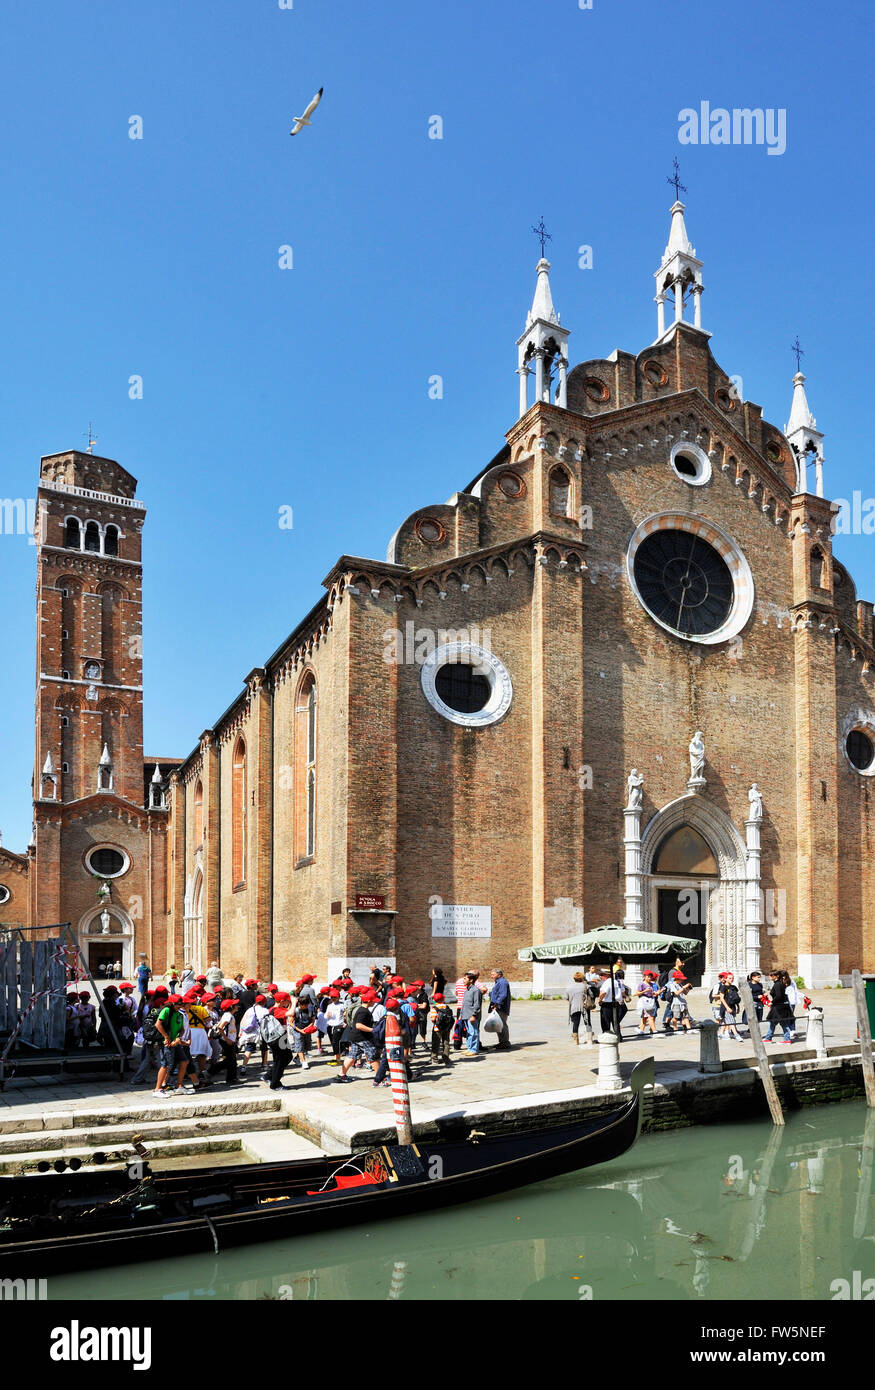 Frari church, on the Campo dei Frari, San Polo district, Venice (with school party in red caps). The Basilica di Santa Maria Gloriosa dei Frari. The church is dedicated to the Assumption; the building was completed in the century following 1338. The campanile, the second tallest in the city, was completed in 1396. The church contains the graves of Titian ( Tiziano Vecelli or Tiziano Vecellio), Canova and several doges. Stock Photo